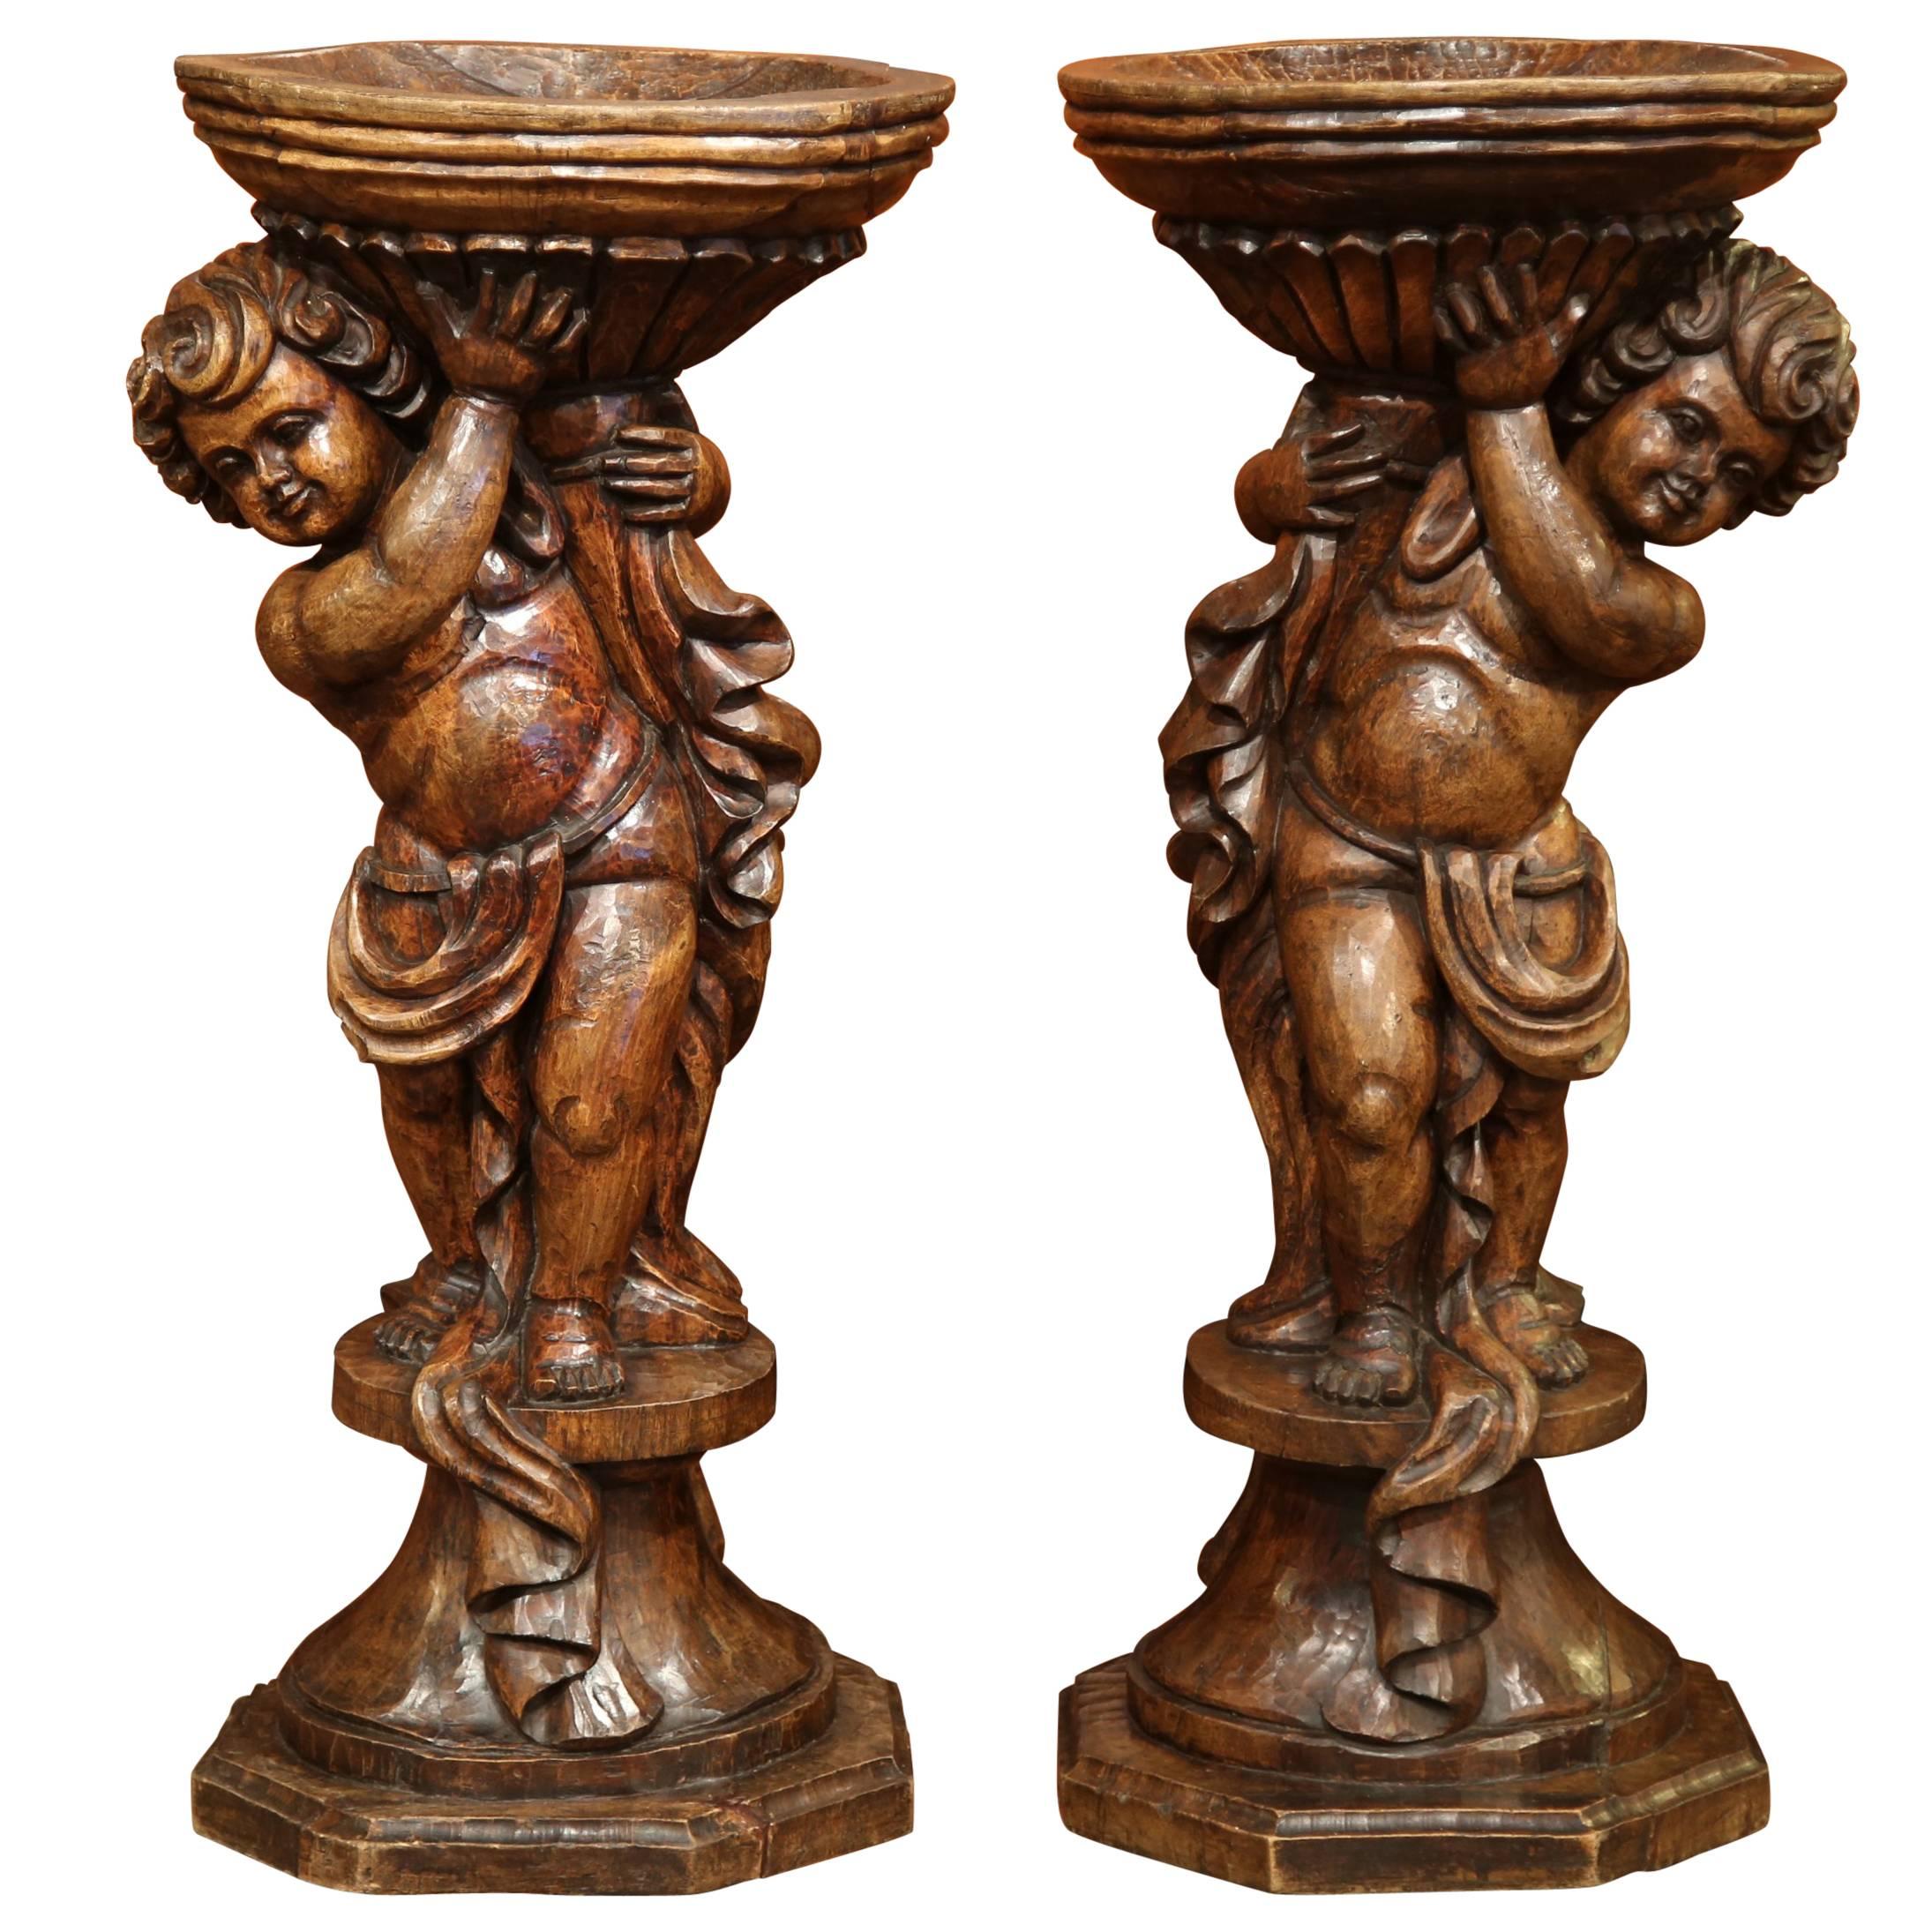 Tall Pair of 18th Century French Hand-Carved Walnut Plant Stands with Cherubs